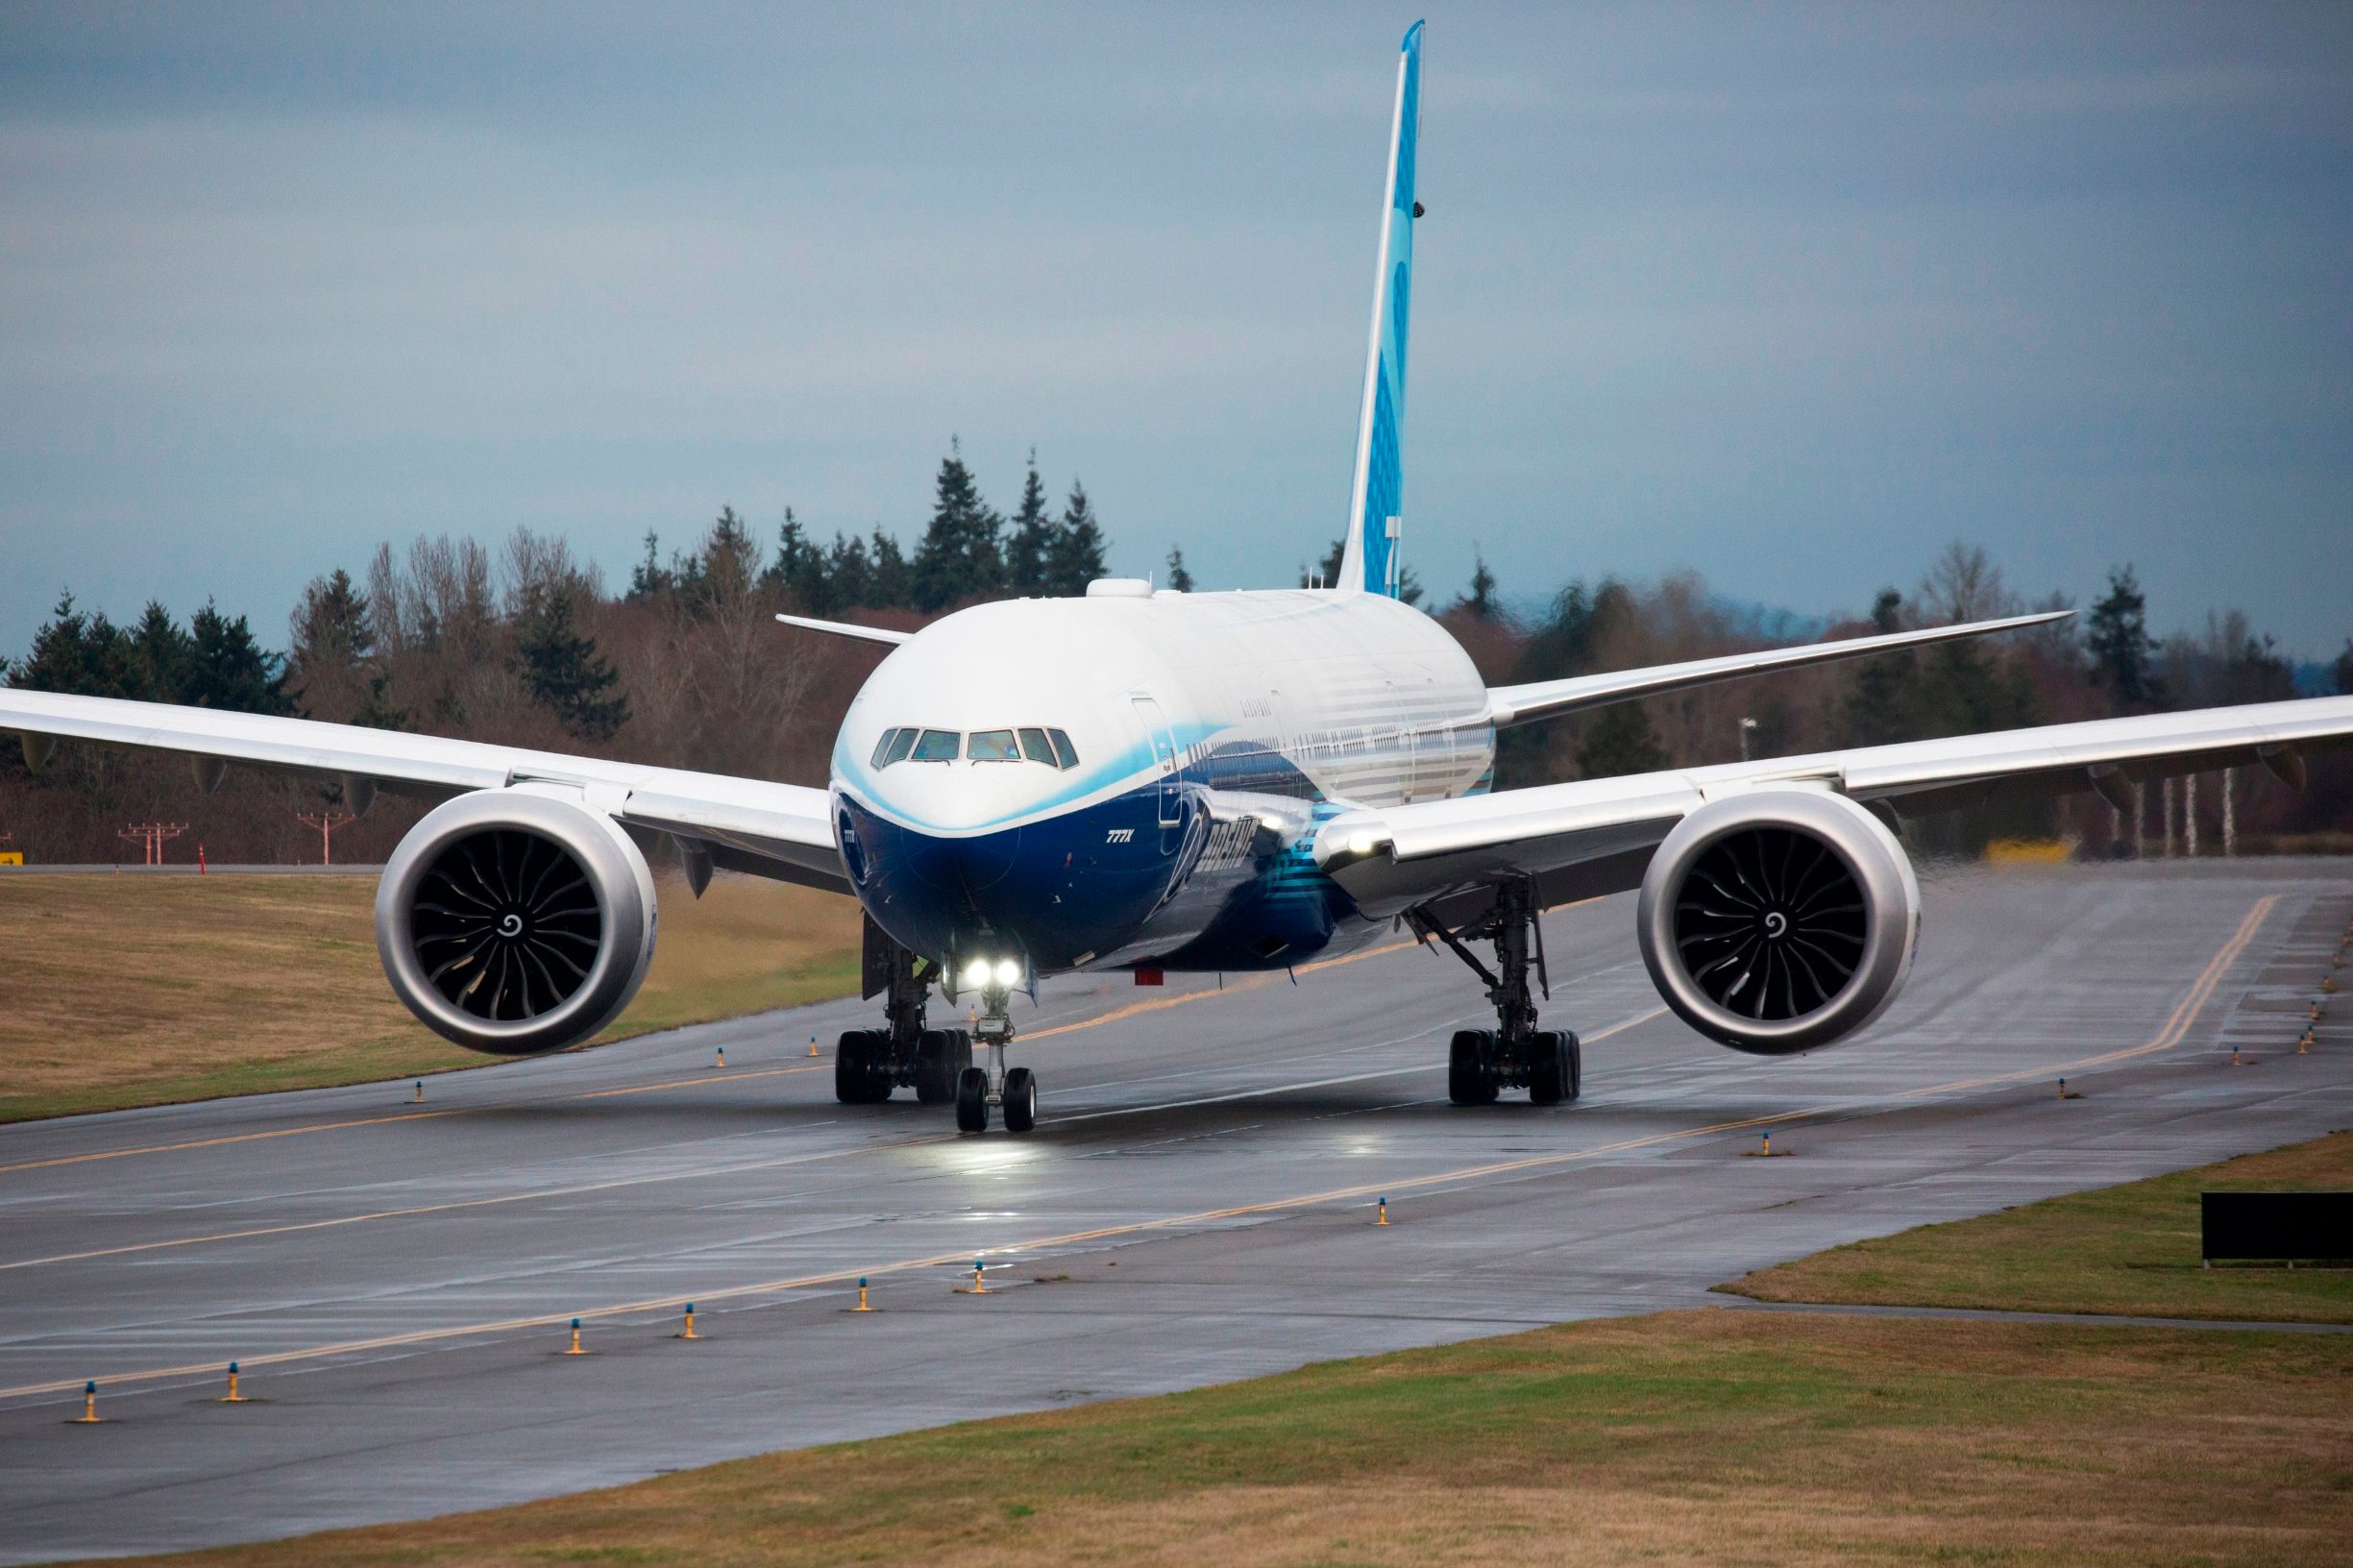 A Boeing 777X airplane taxis before taking off on its inaugural flight at Paine Field in Everett, Washington on January 25, 2020. - Boeing's new long-haul 777X airliner made its first flight Saturday, a major step forward for the company whose broader prospects remain clouded by the 737 MAX crisis. The plane took off from a rain-slicked runway a few minutes after 10:00 am local time (1800 GMT), at Paine Field in Everett, Washington, home to Boeing's manufacturing site in the northwestern US. (Photo by Jason Redmond / AFP)